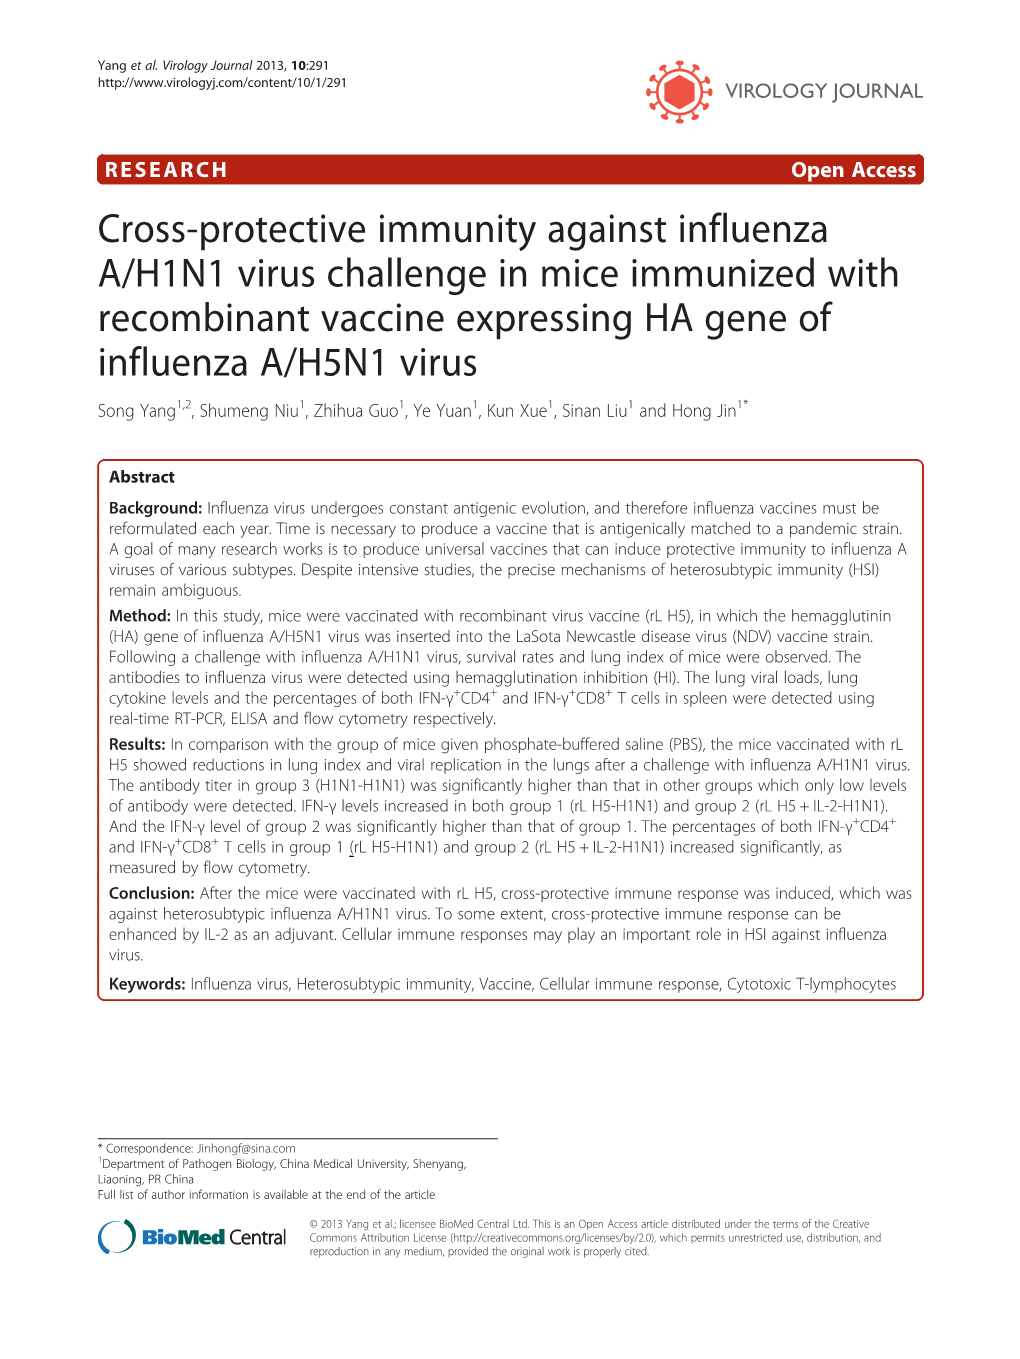 Cross-Protective Immunity Against Influenza A/H1N1 Virus Challenge in Mice Immunized with Recombinant Vaccine Expressing HA Gene